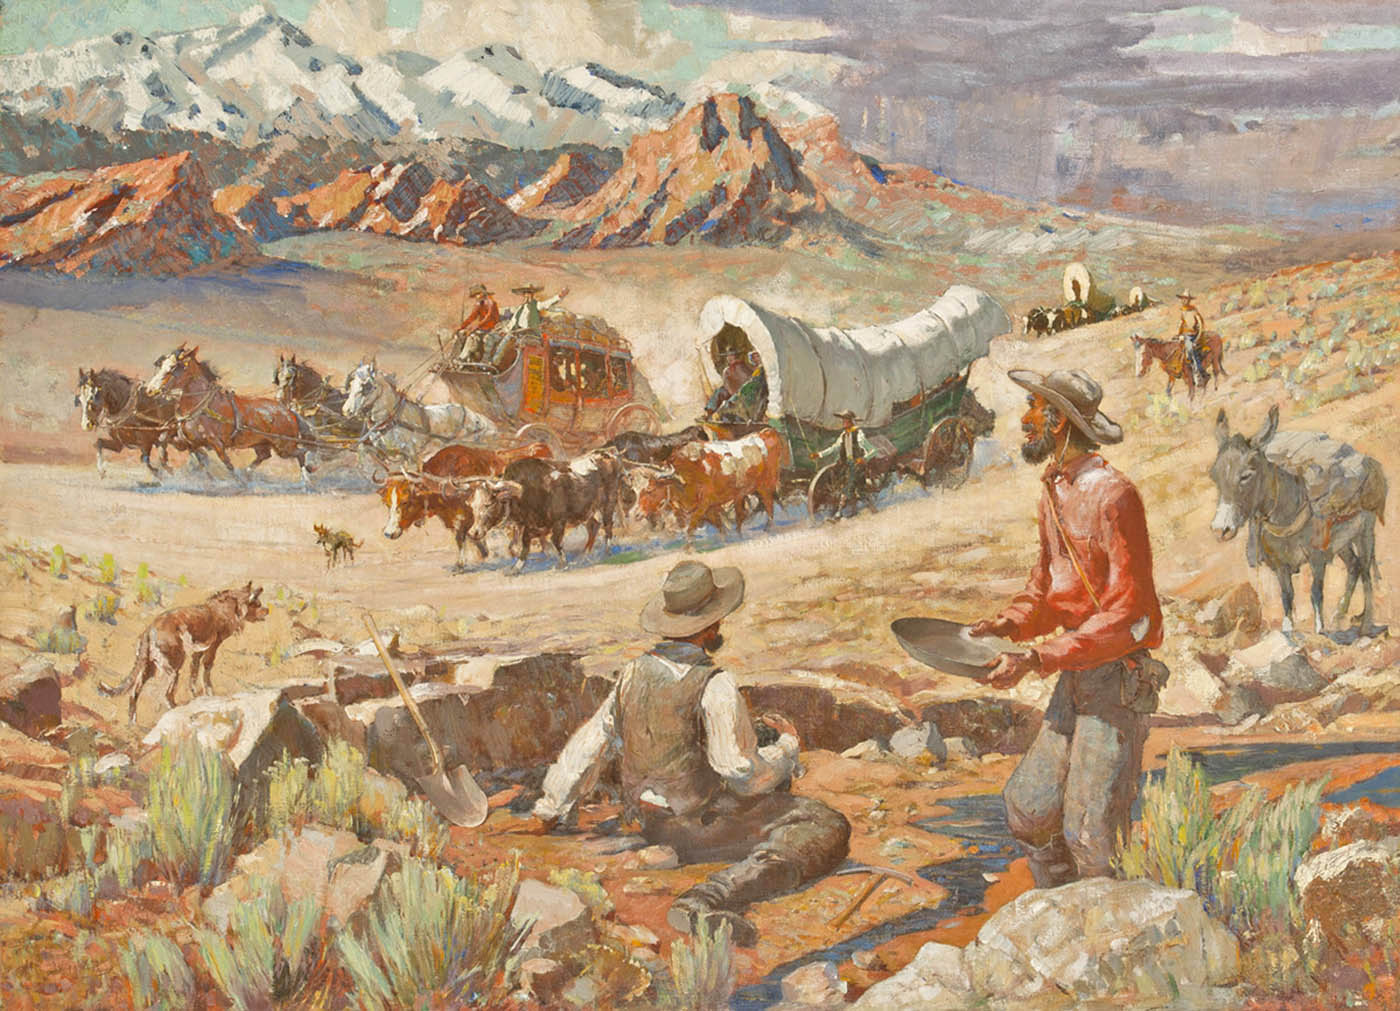 The Forty-niners, Oscar E. Berninghaus, before 1942, Oil on canvas, Sid Richardson Museum